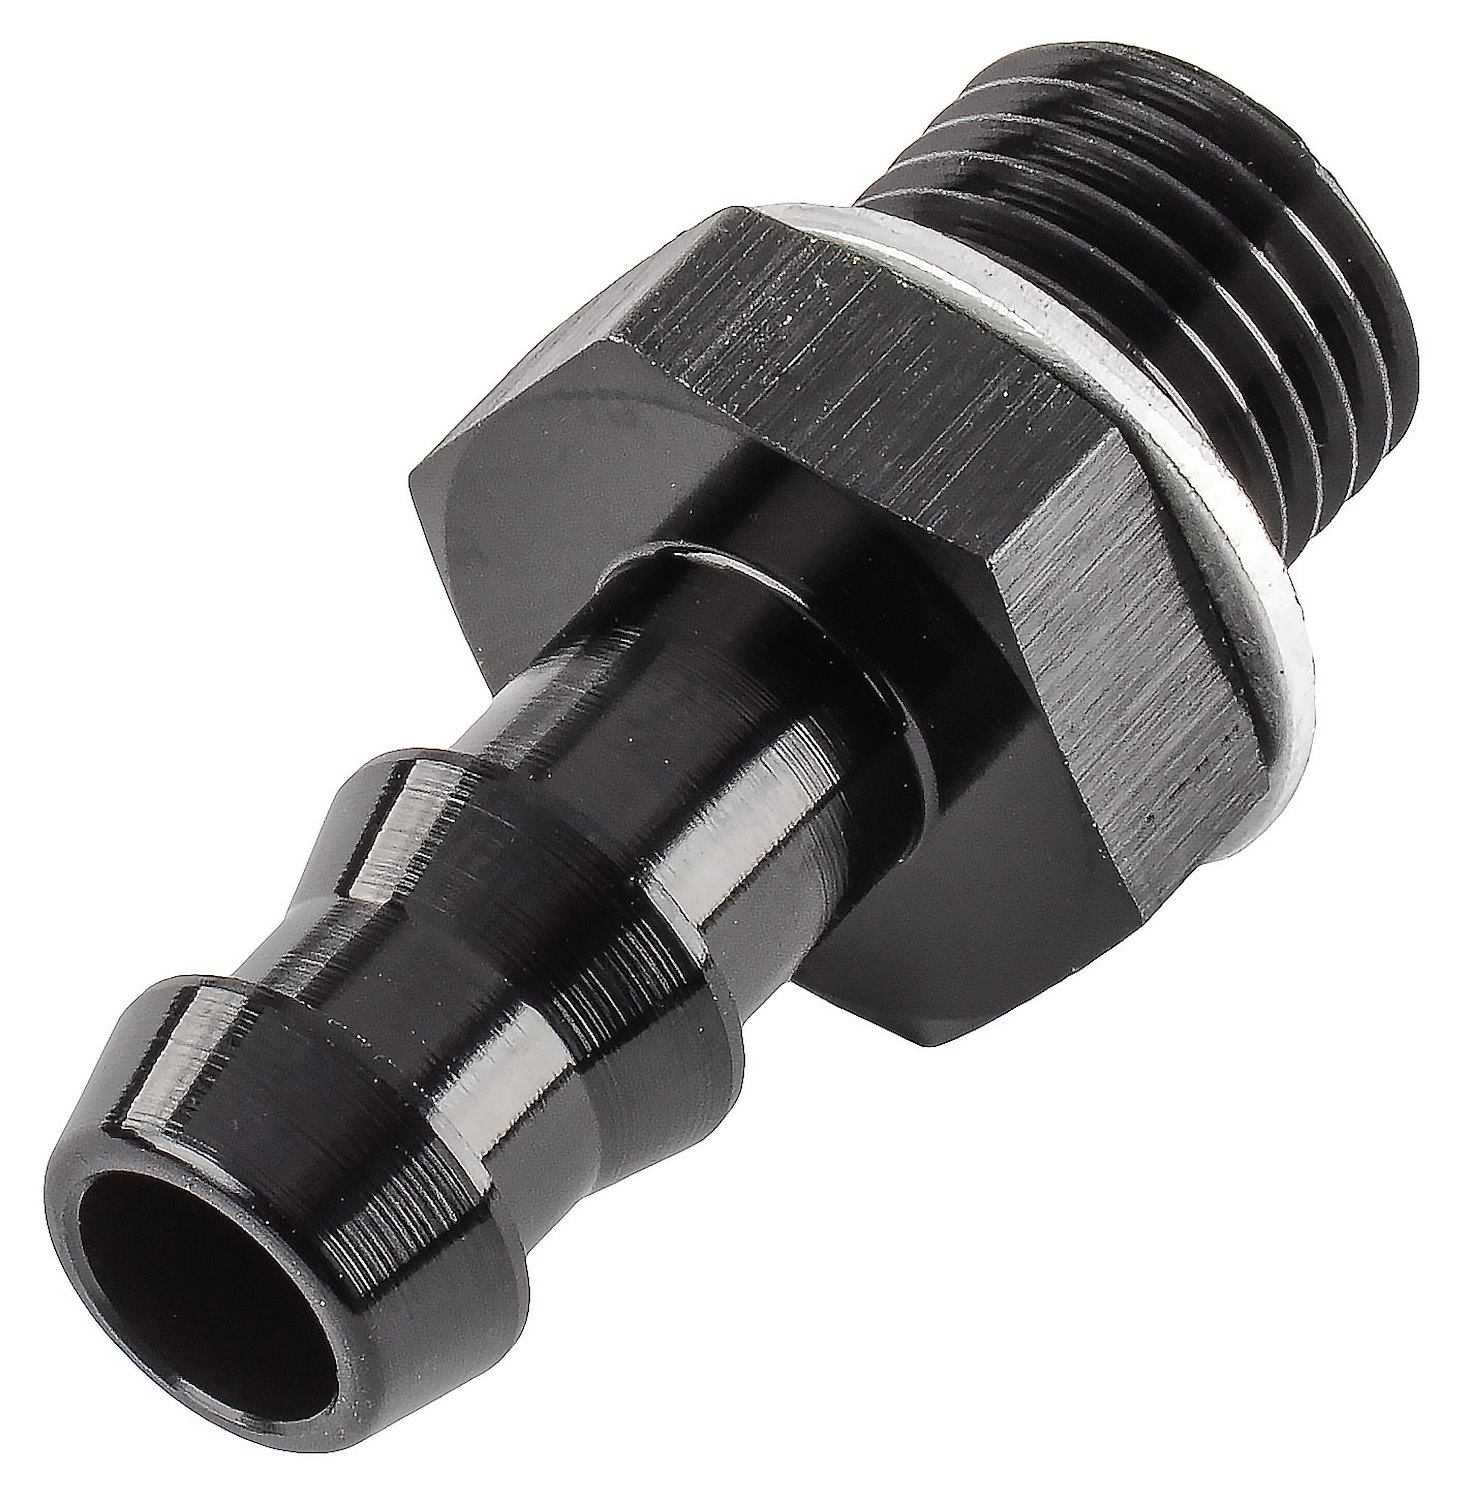 Hose Barb Adapter 14mm x 1.5 Male Straight to 3/8" Hose